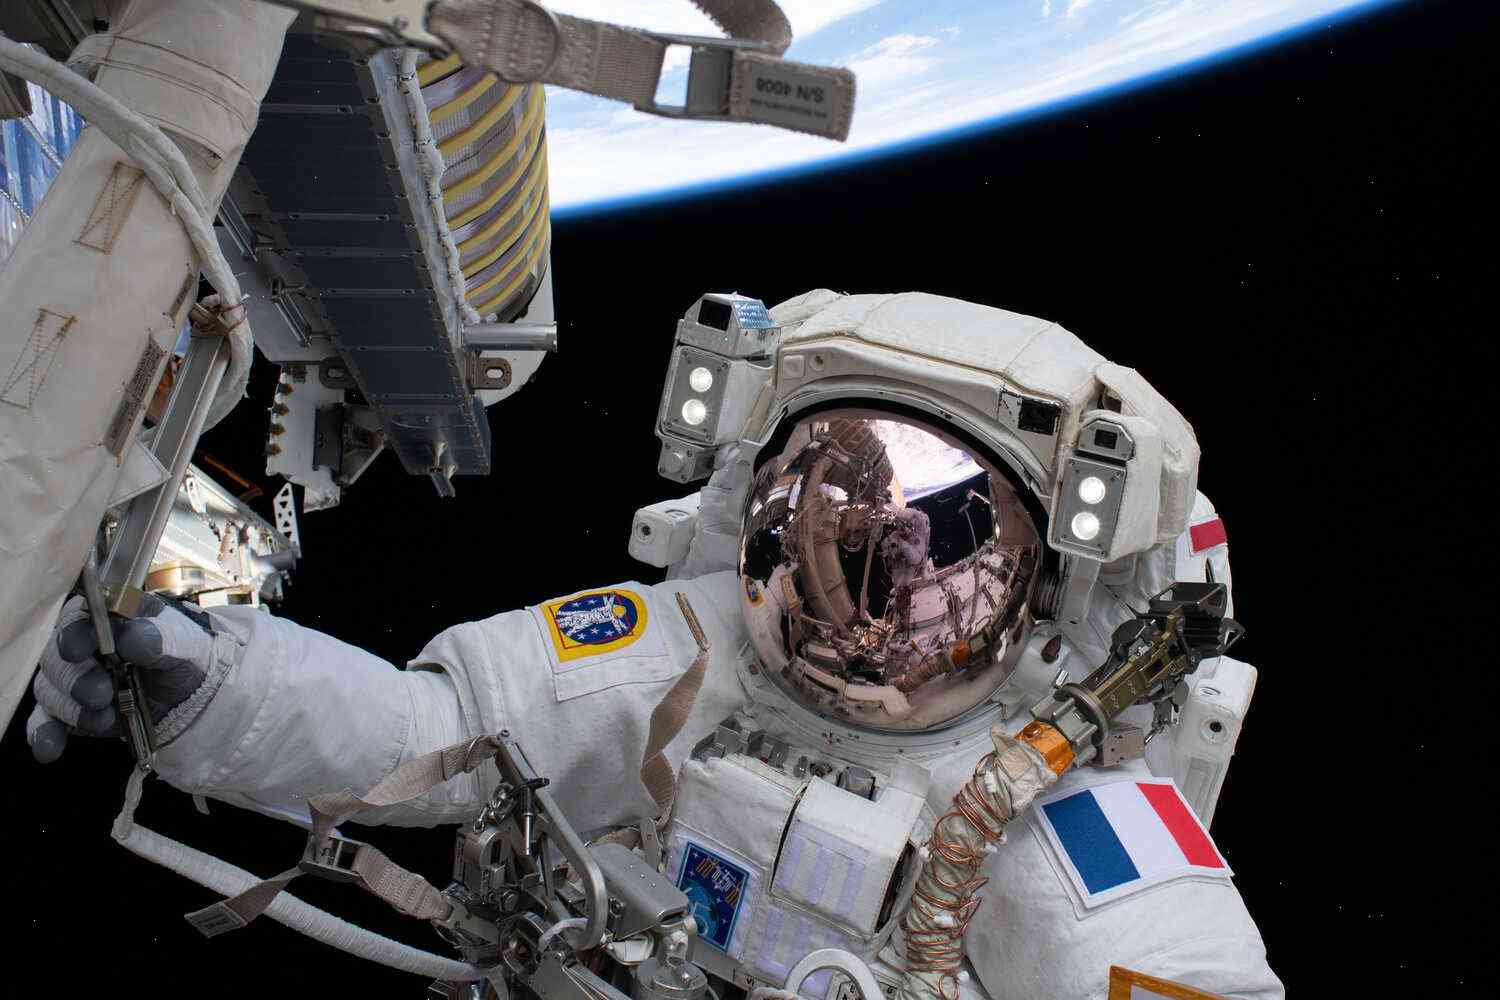 Johnson Space Center 'prepared to delay space walk by astronauts over risk'